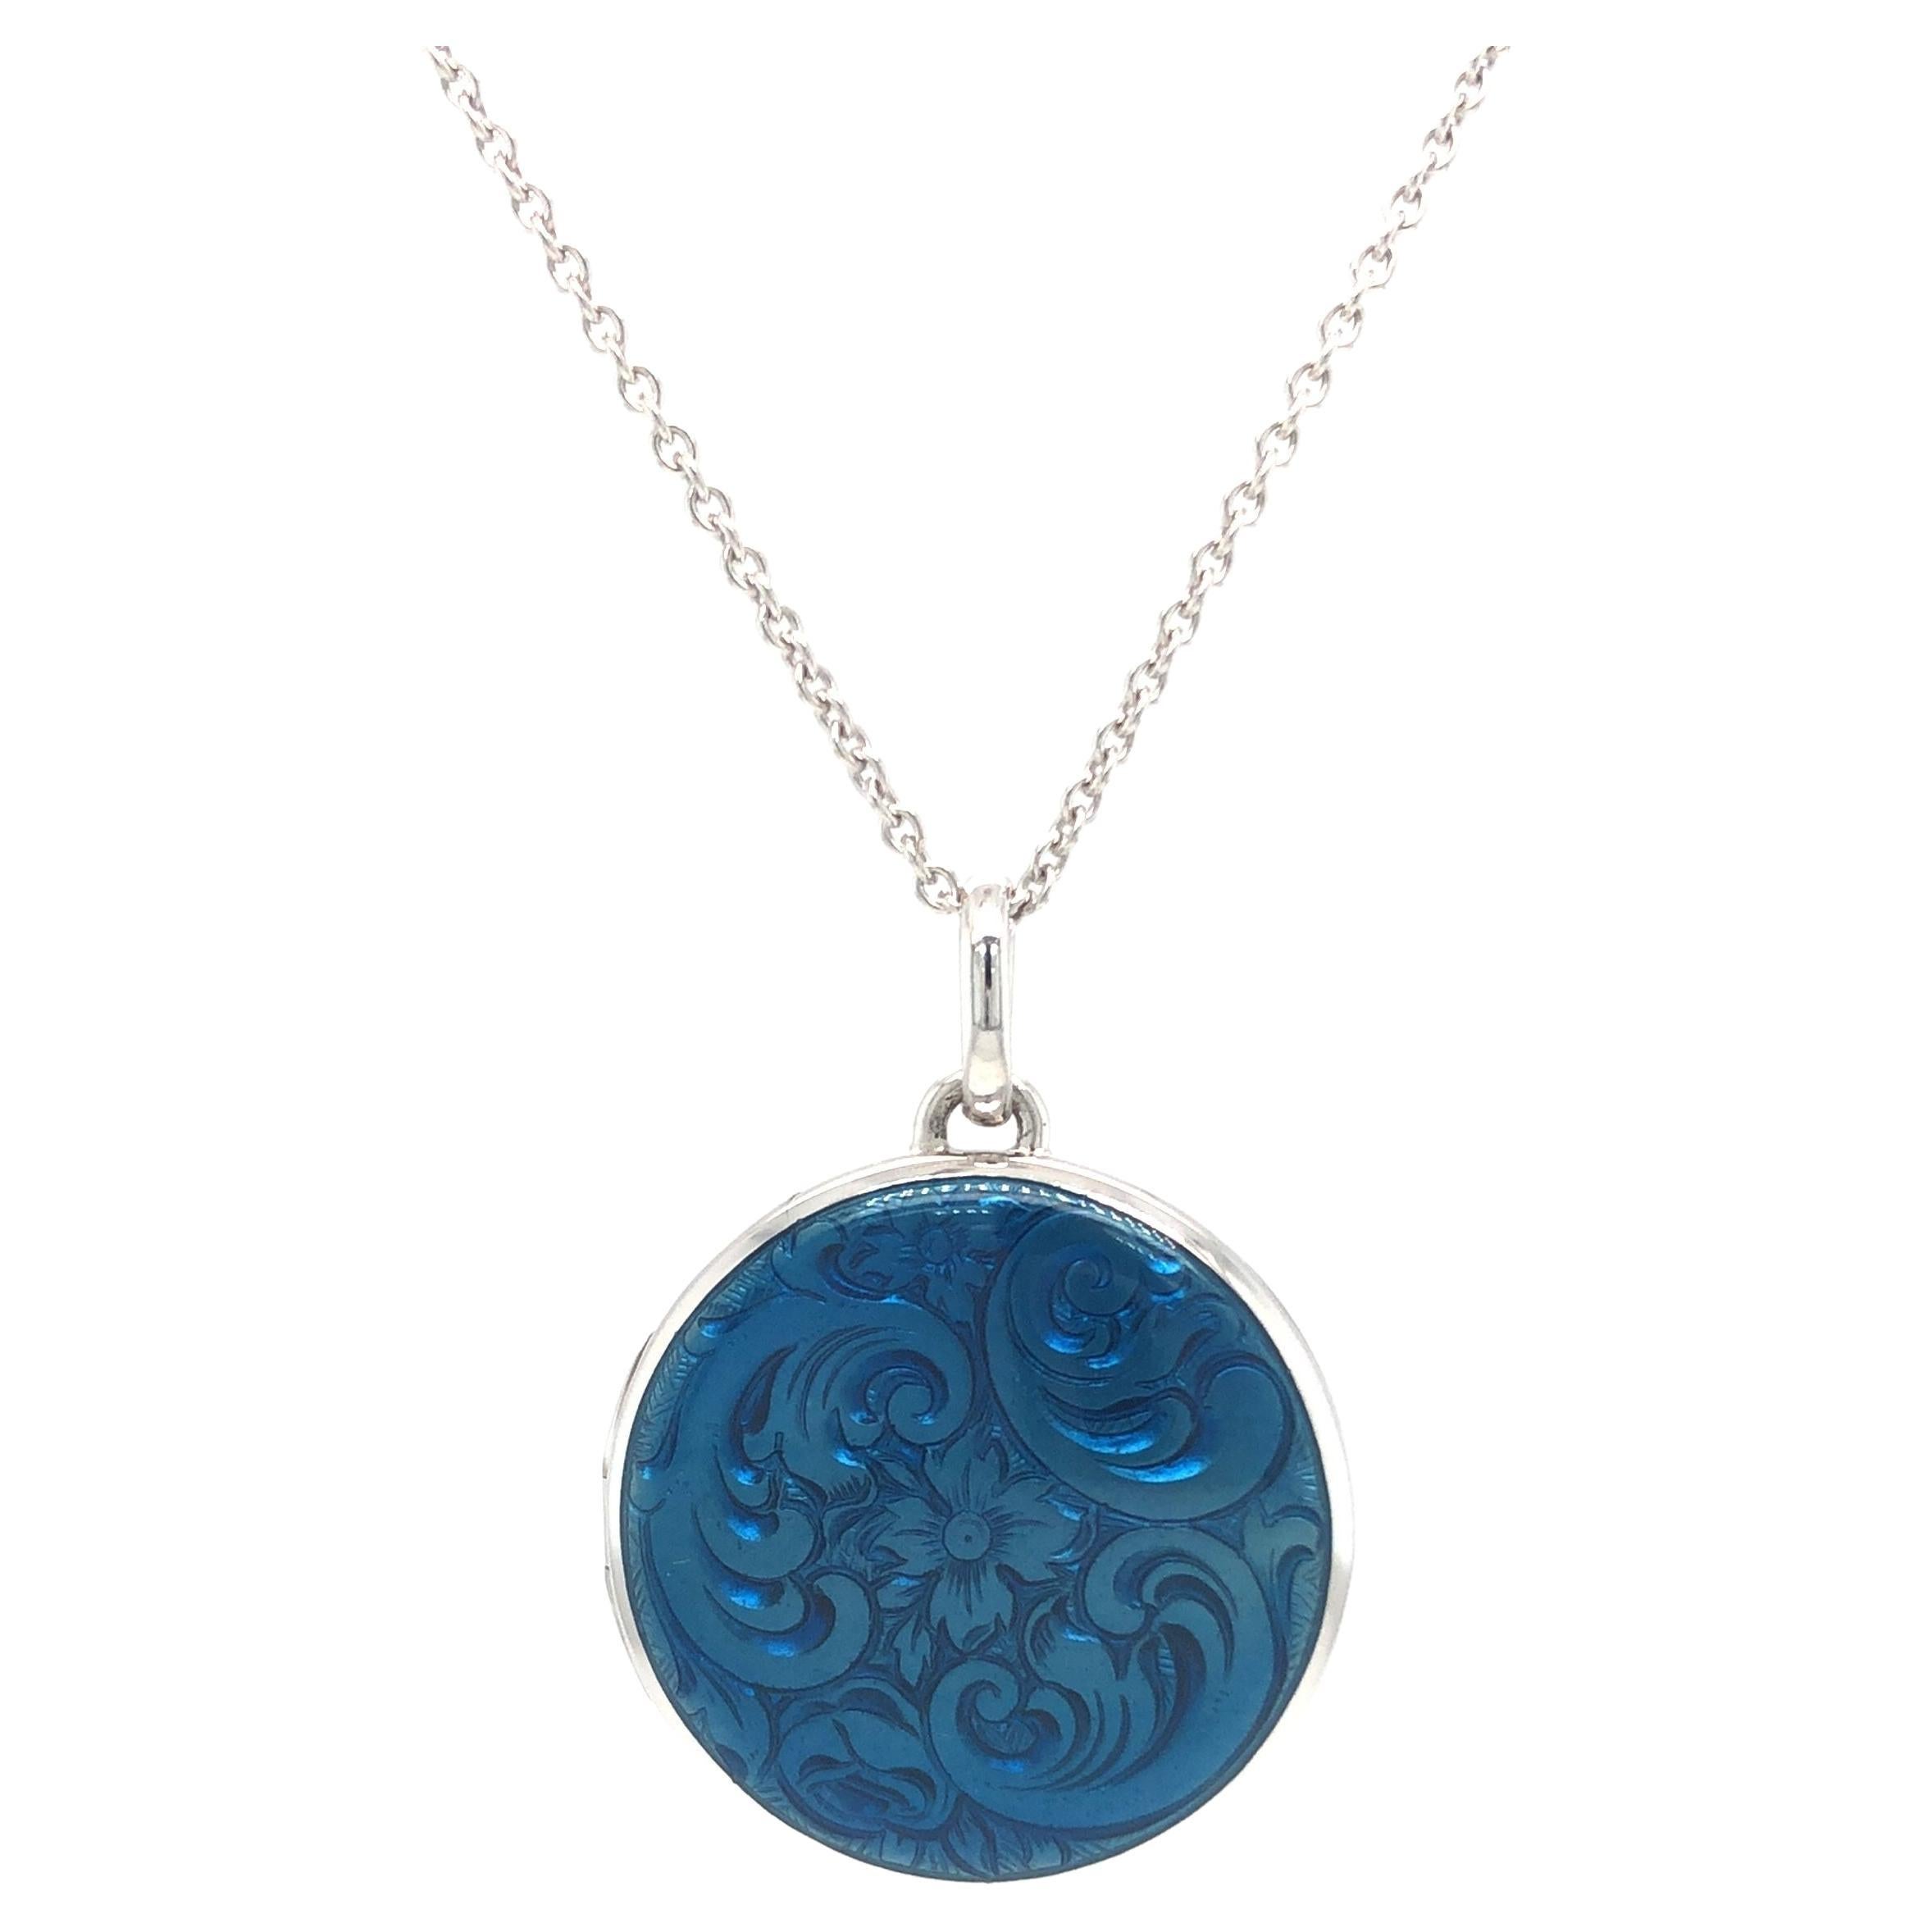 Round Locket Pendant White Gold Petrol Blue Fire Enamel over Scroll Engraving For Sale